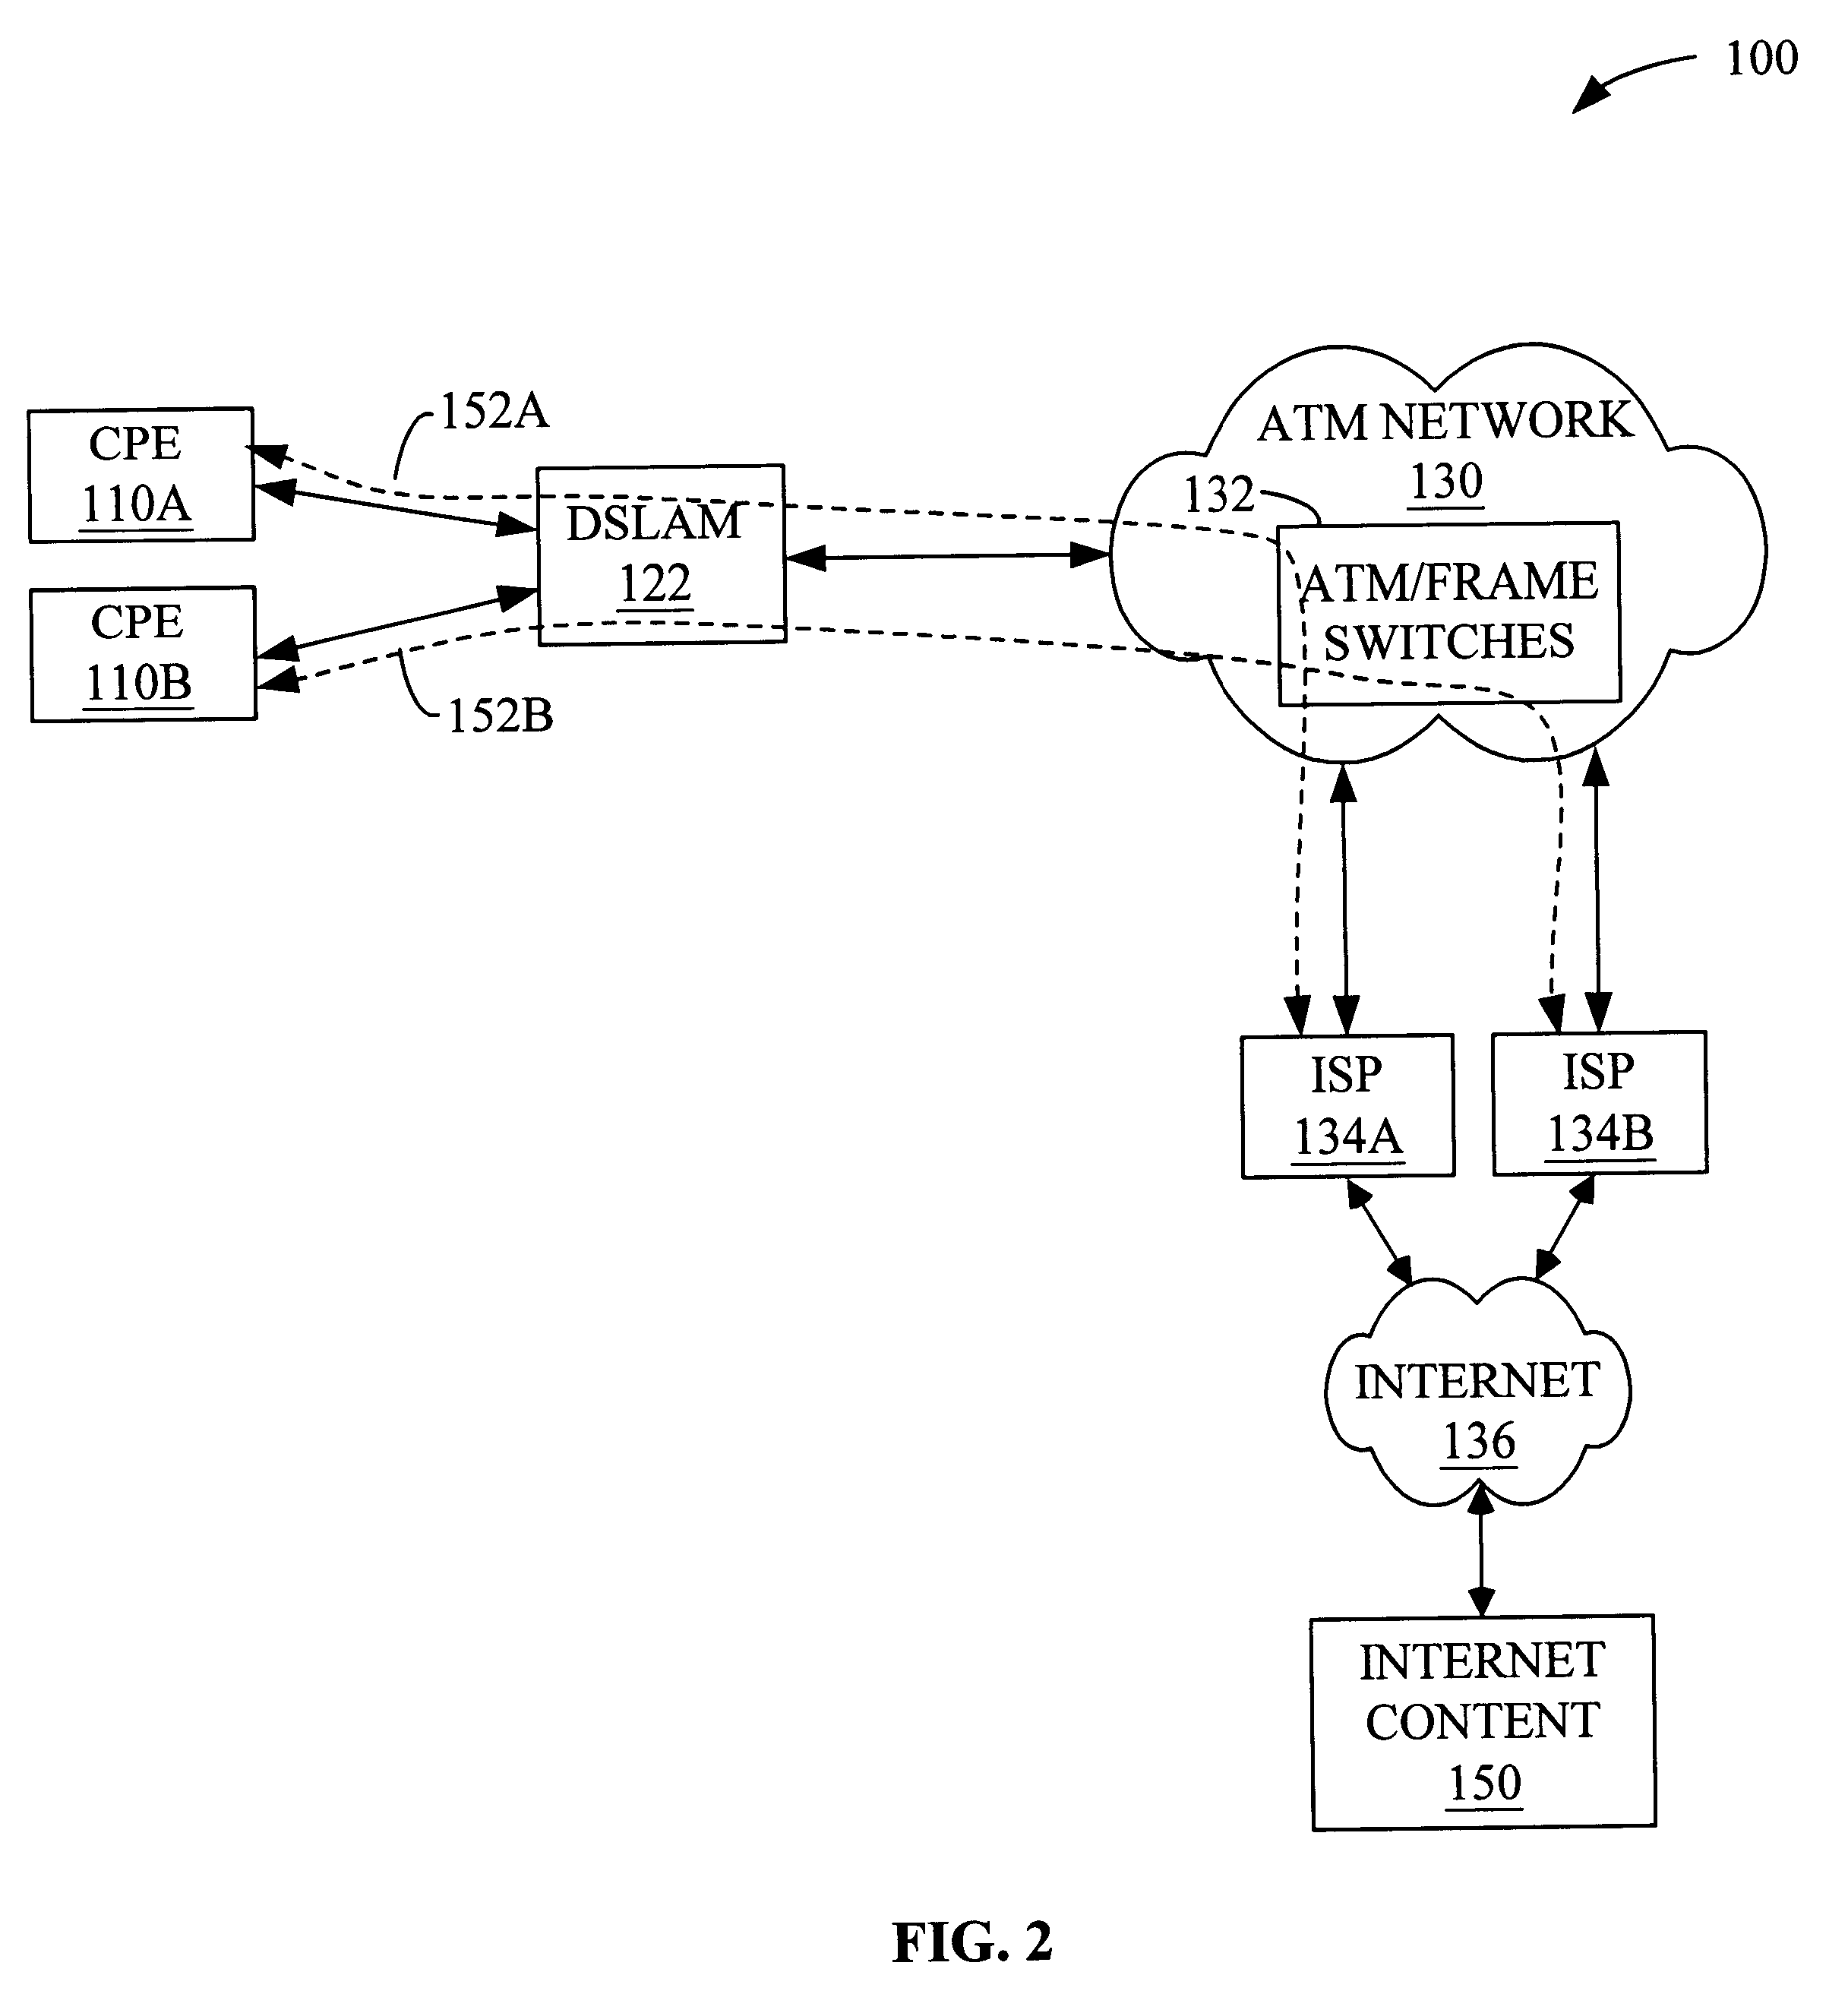 System and method for providing broadband content to high-speed access subscribers